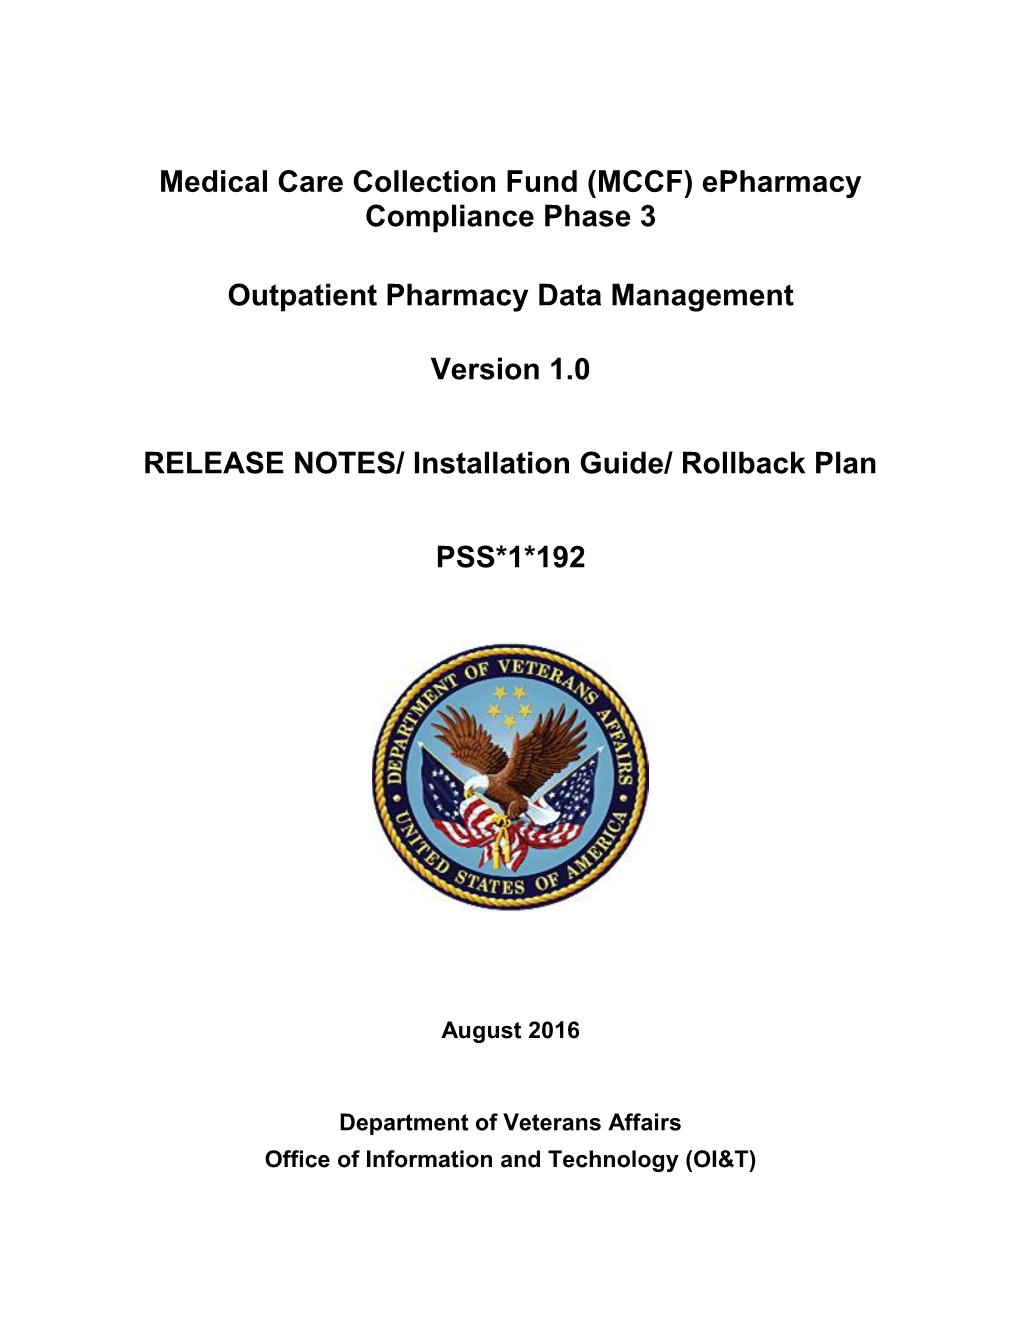 Medical Care Collection Fund (MCCF) Epharmacy Compliance Phase 3